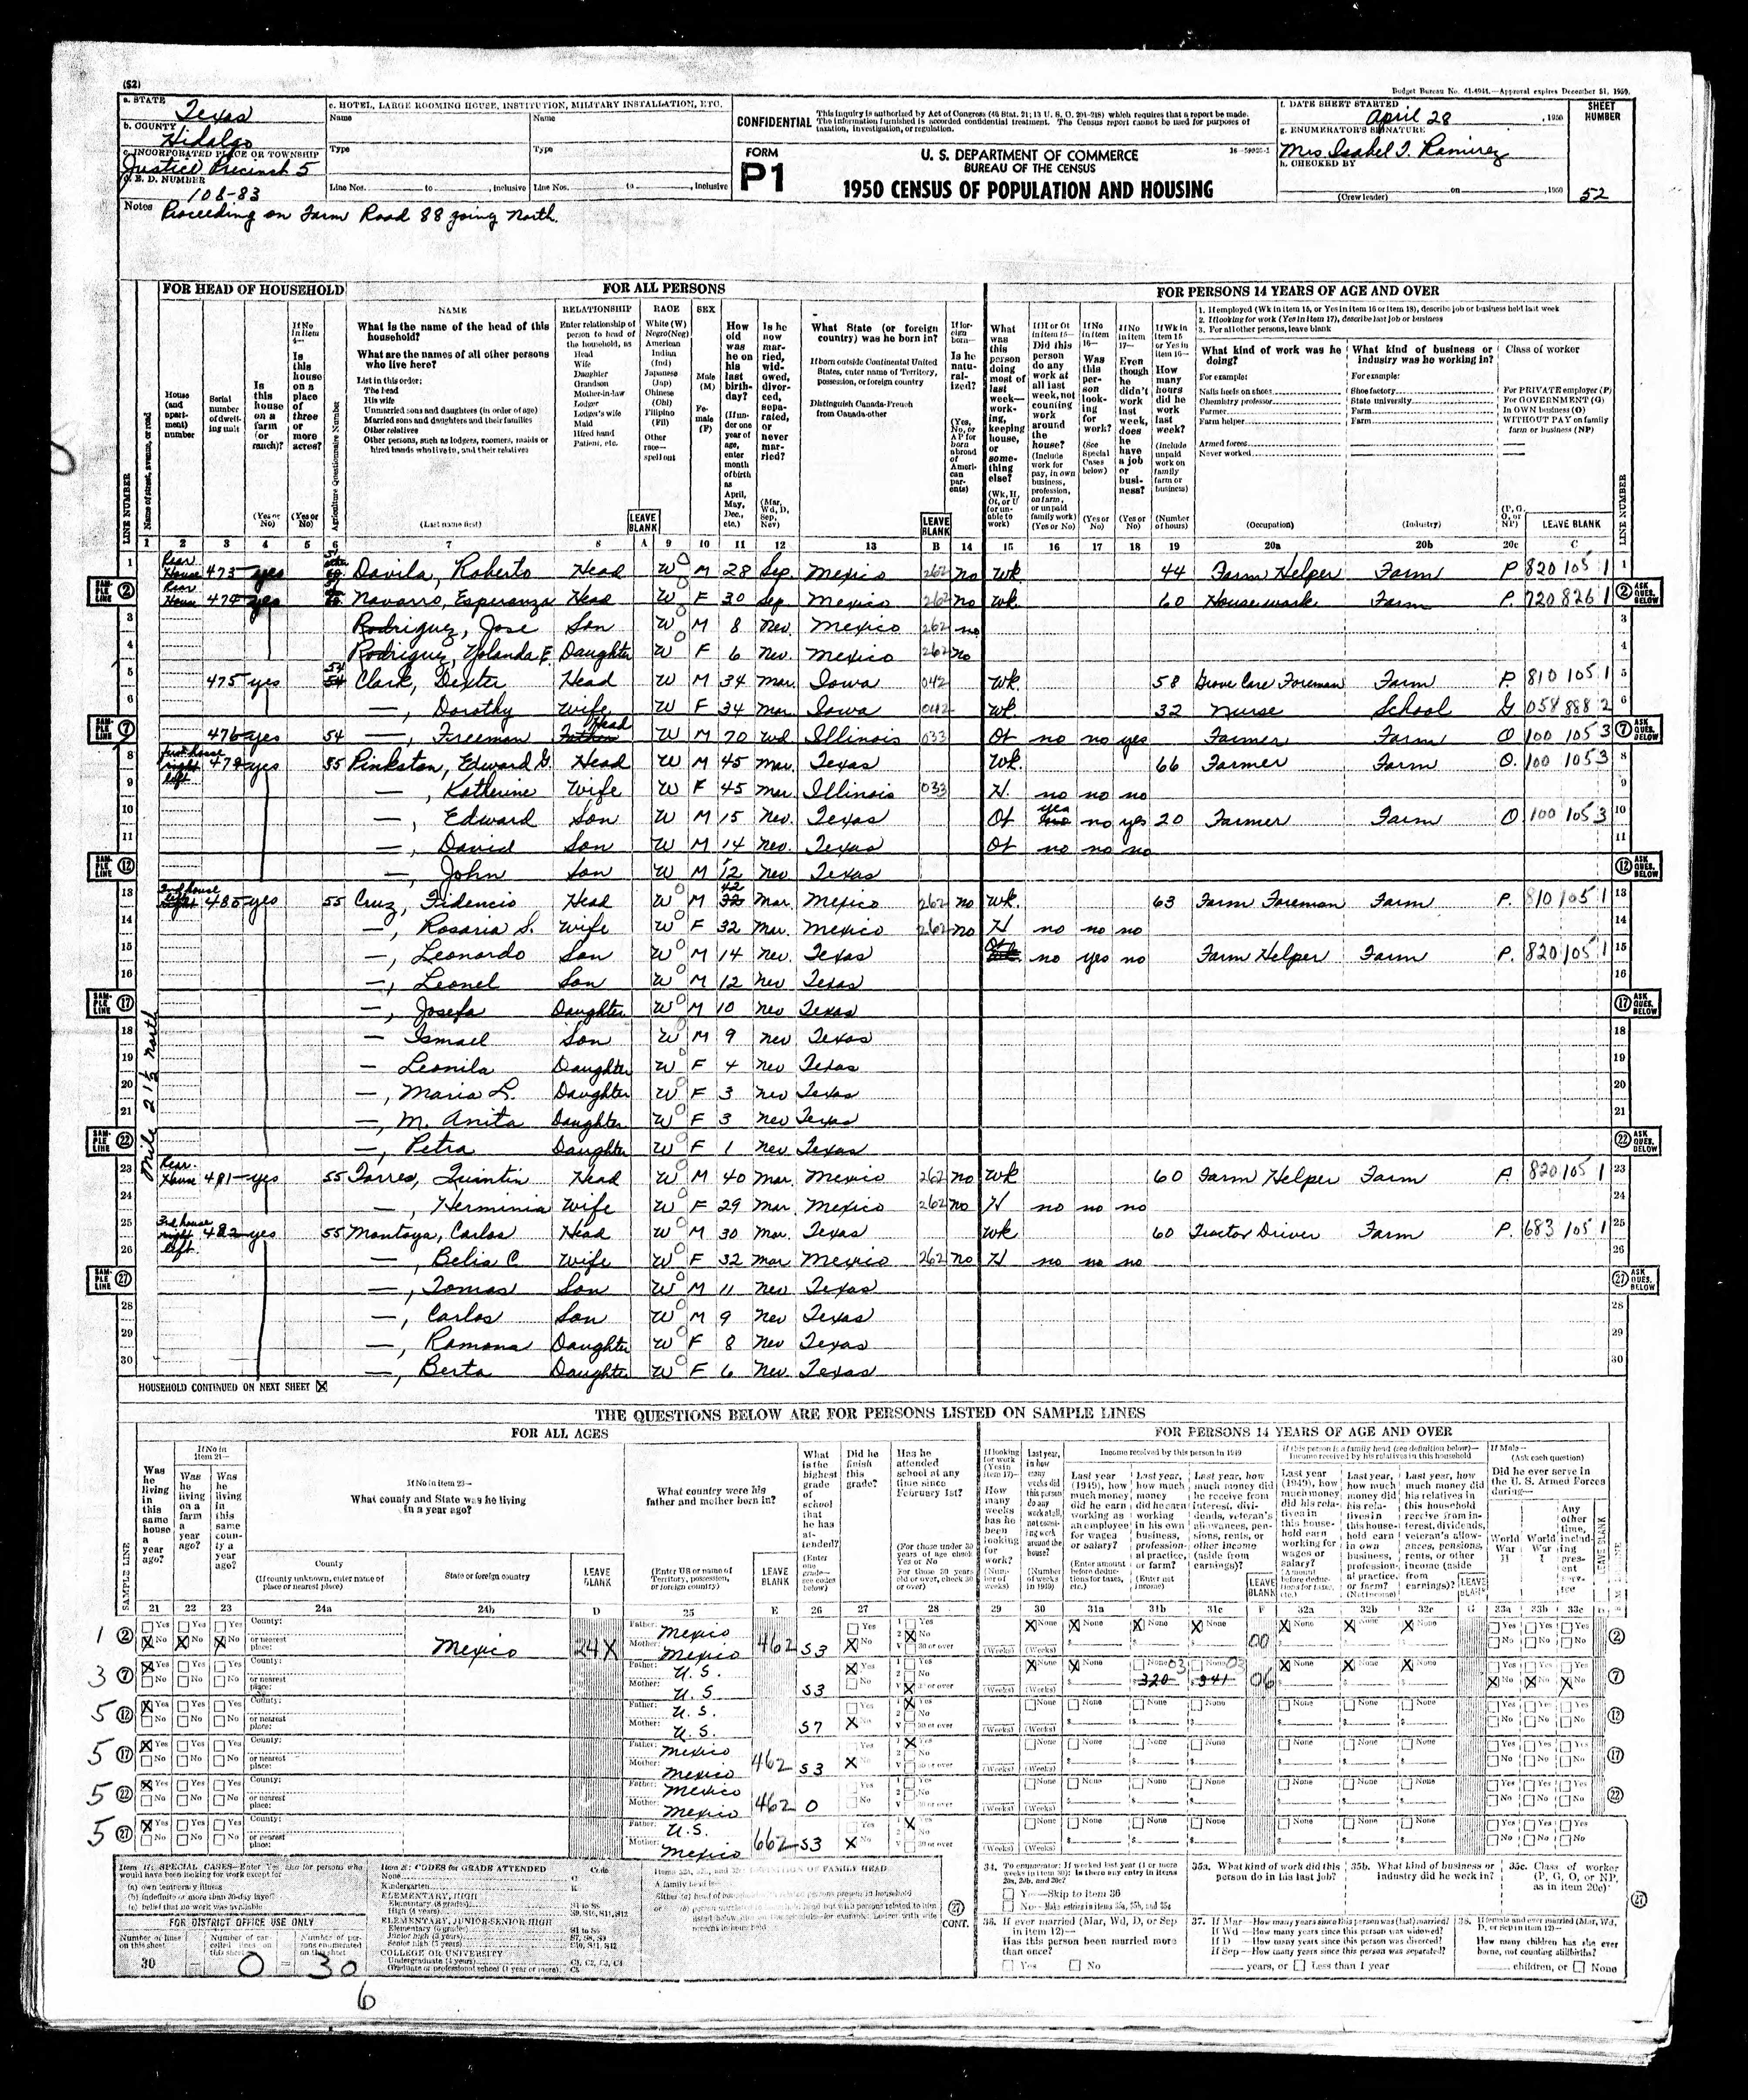 A page from the 1950 US Census